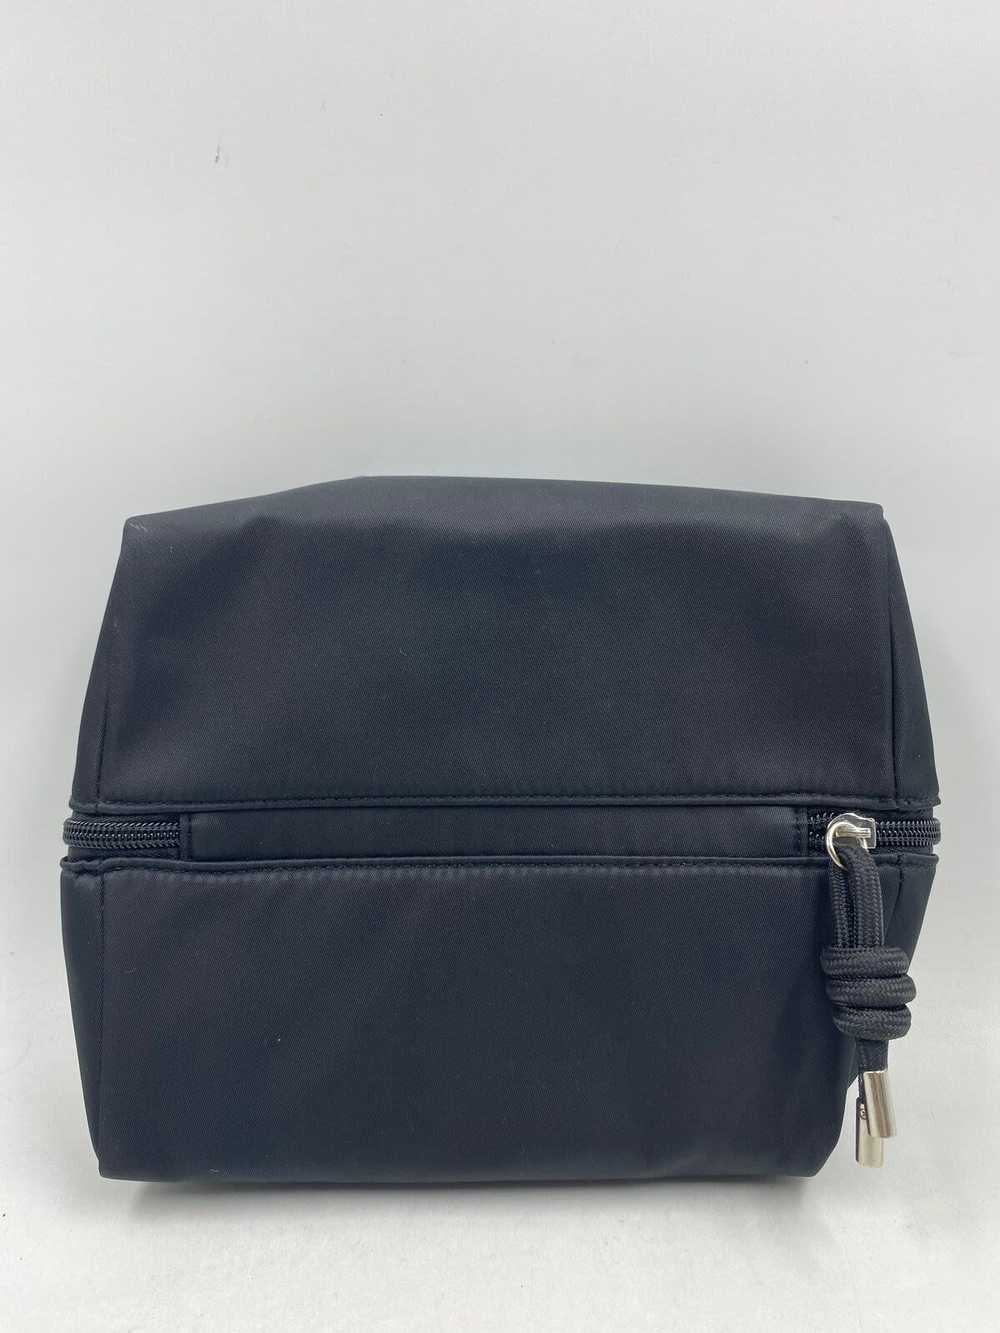 Authentic DIOR Beauty Black Toiletry Travel Case - image 2